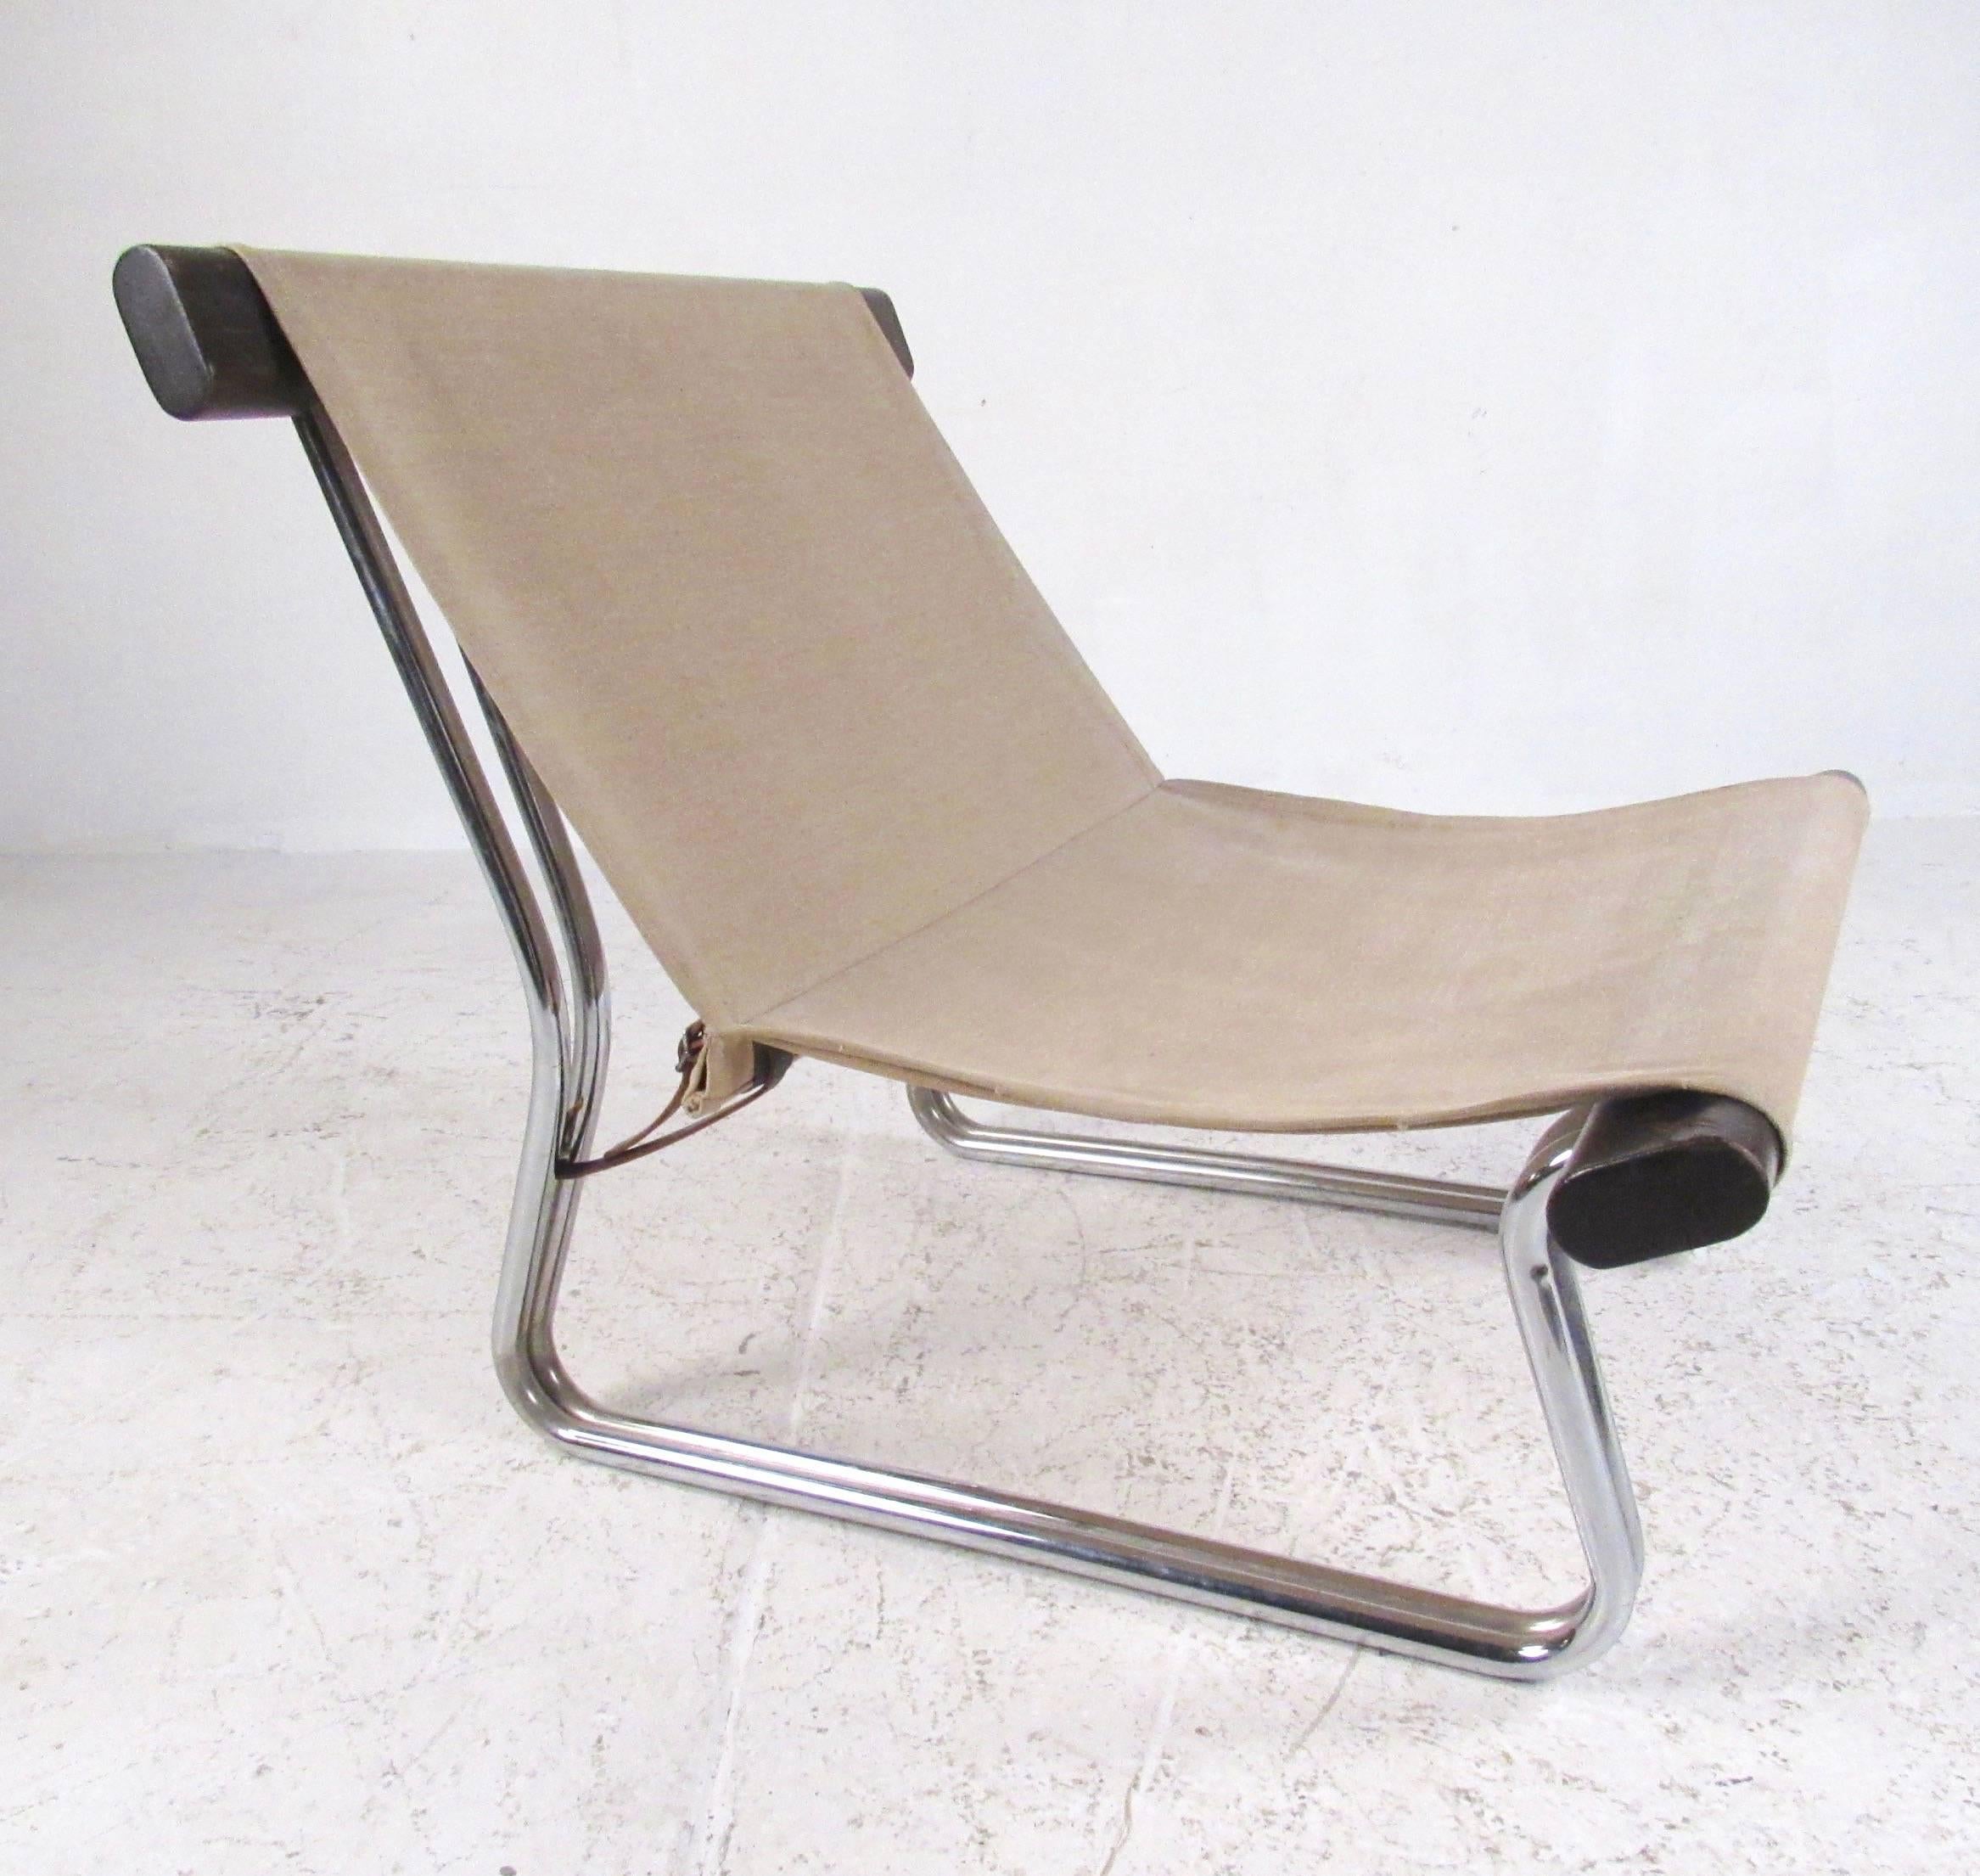 This vintage modern sling chair features tubular chrome and wood frame with a canvas seat. The Scandinavian modern slipper chair makes a striking yet simple midcentury addition to any seating area. Please confirm item location (NY or NJ).